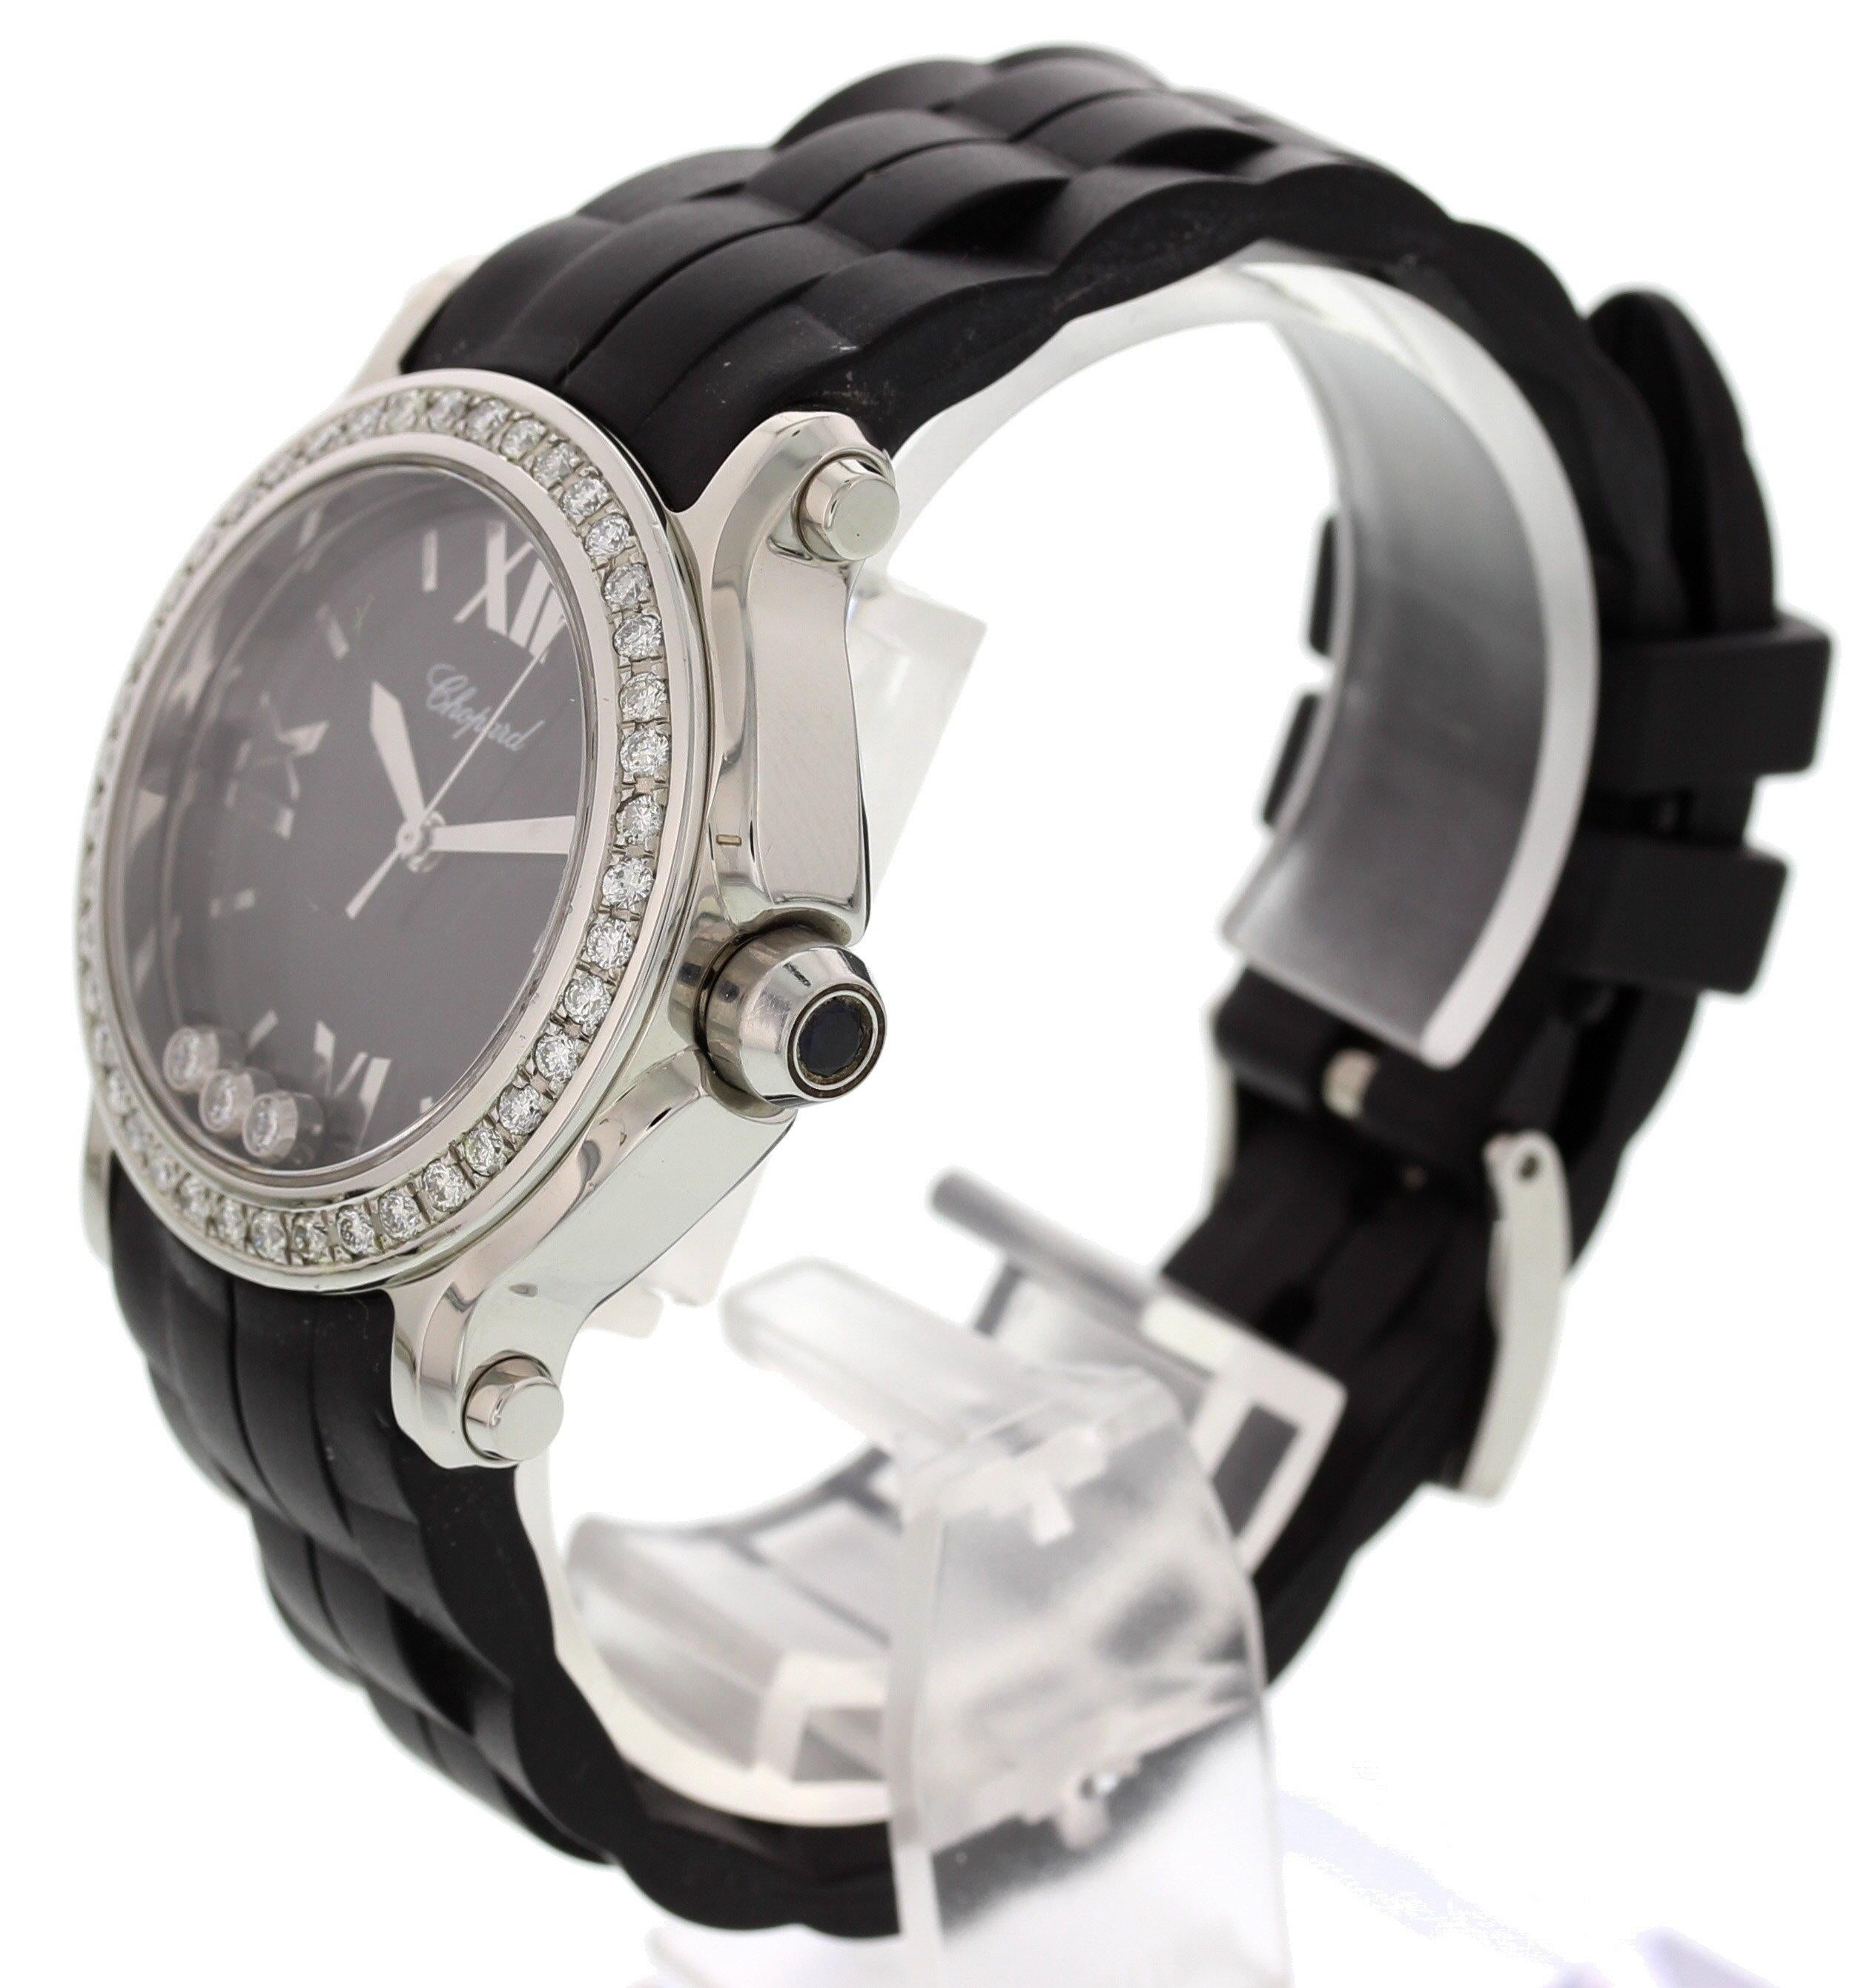 Chopard Happy Sport Floating Diamonds 8475. 36 mm stainless steel case. Stainless steel bezel with diamonds. Black dial with date display and steel hands and Roman numeral markers. Round diamonds floating within dial. Adjustable black rubber strap